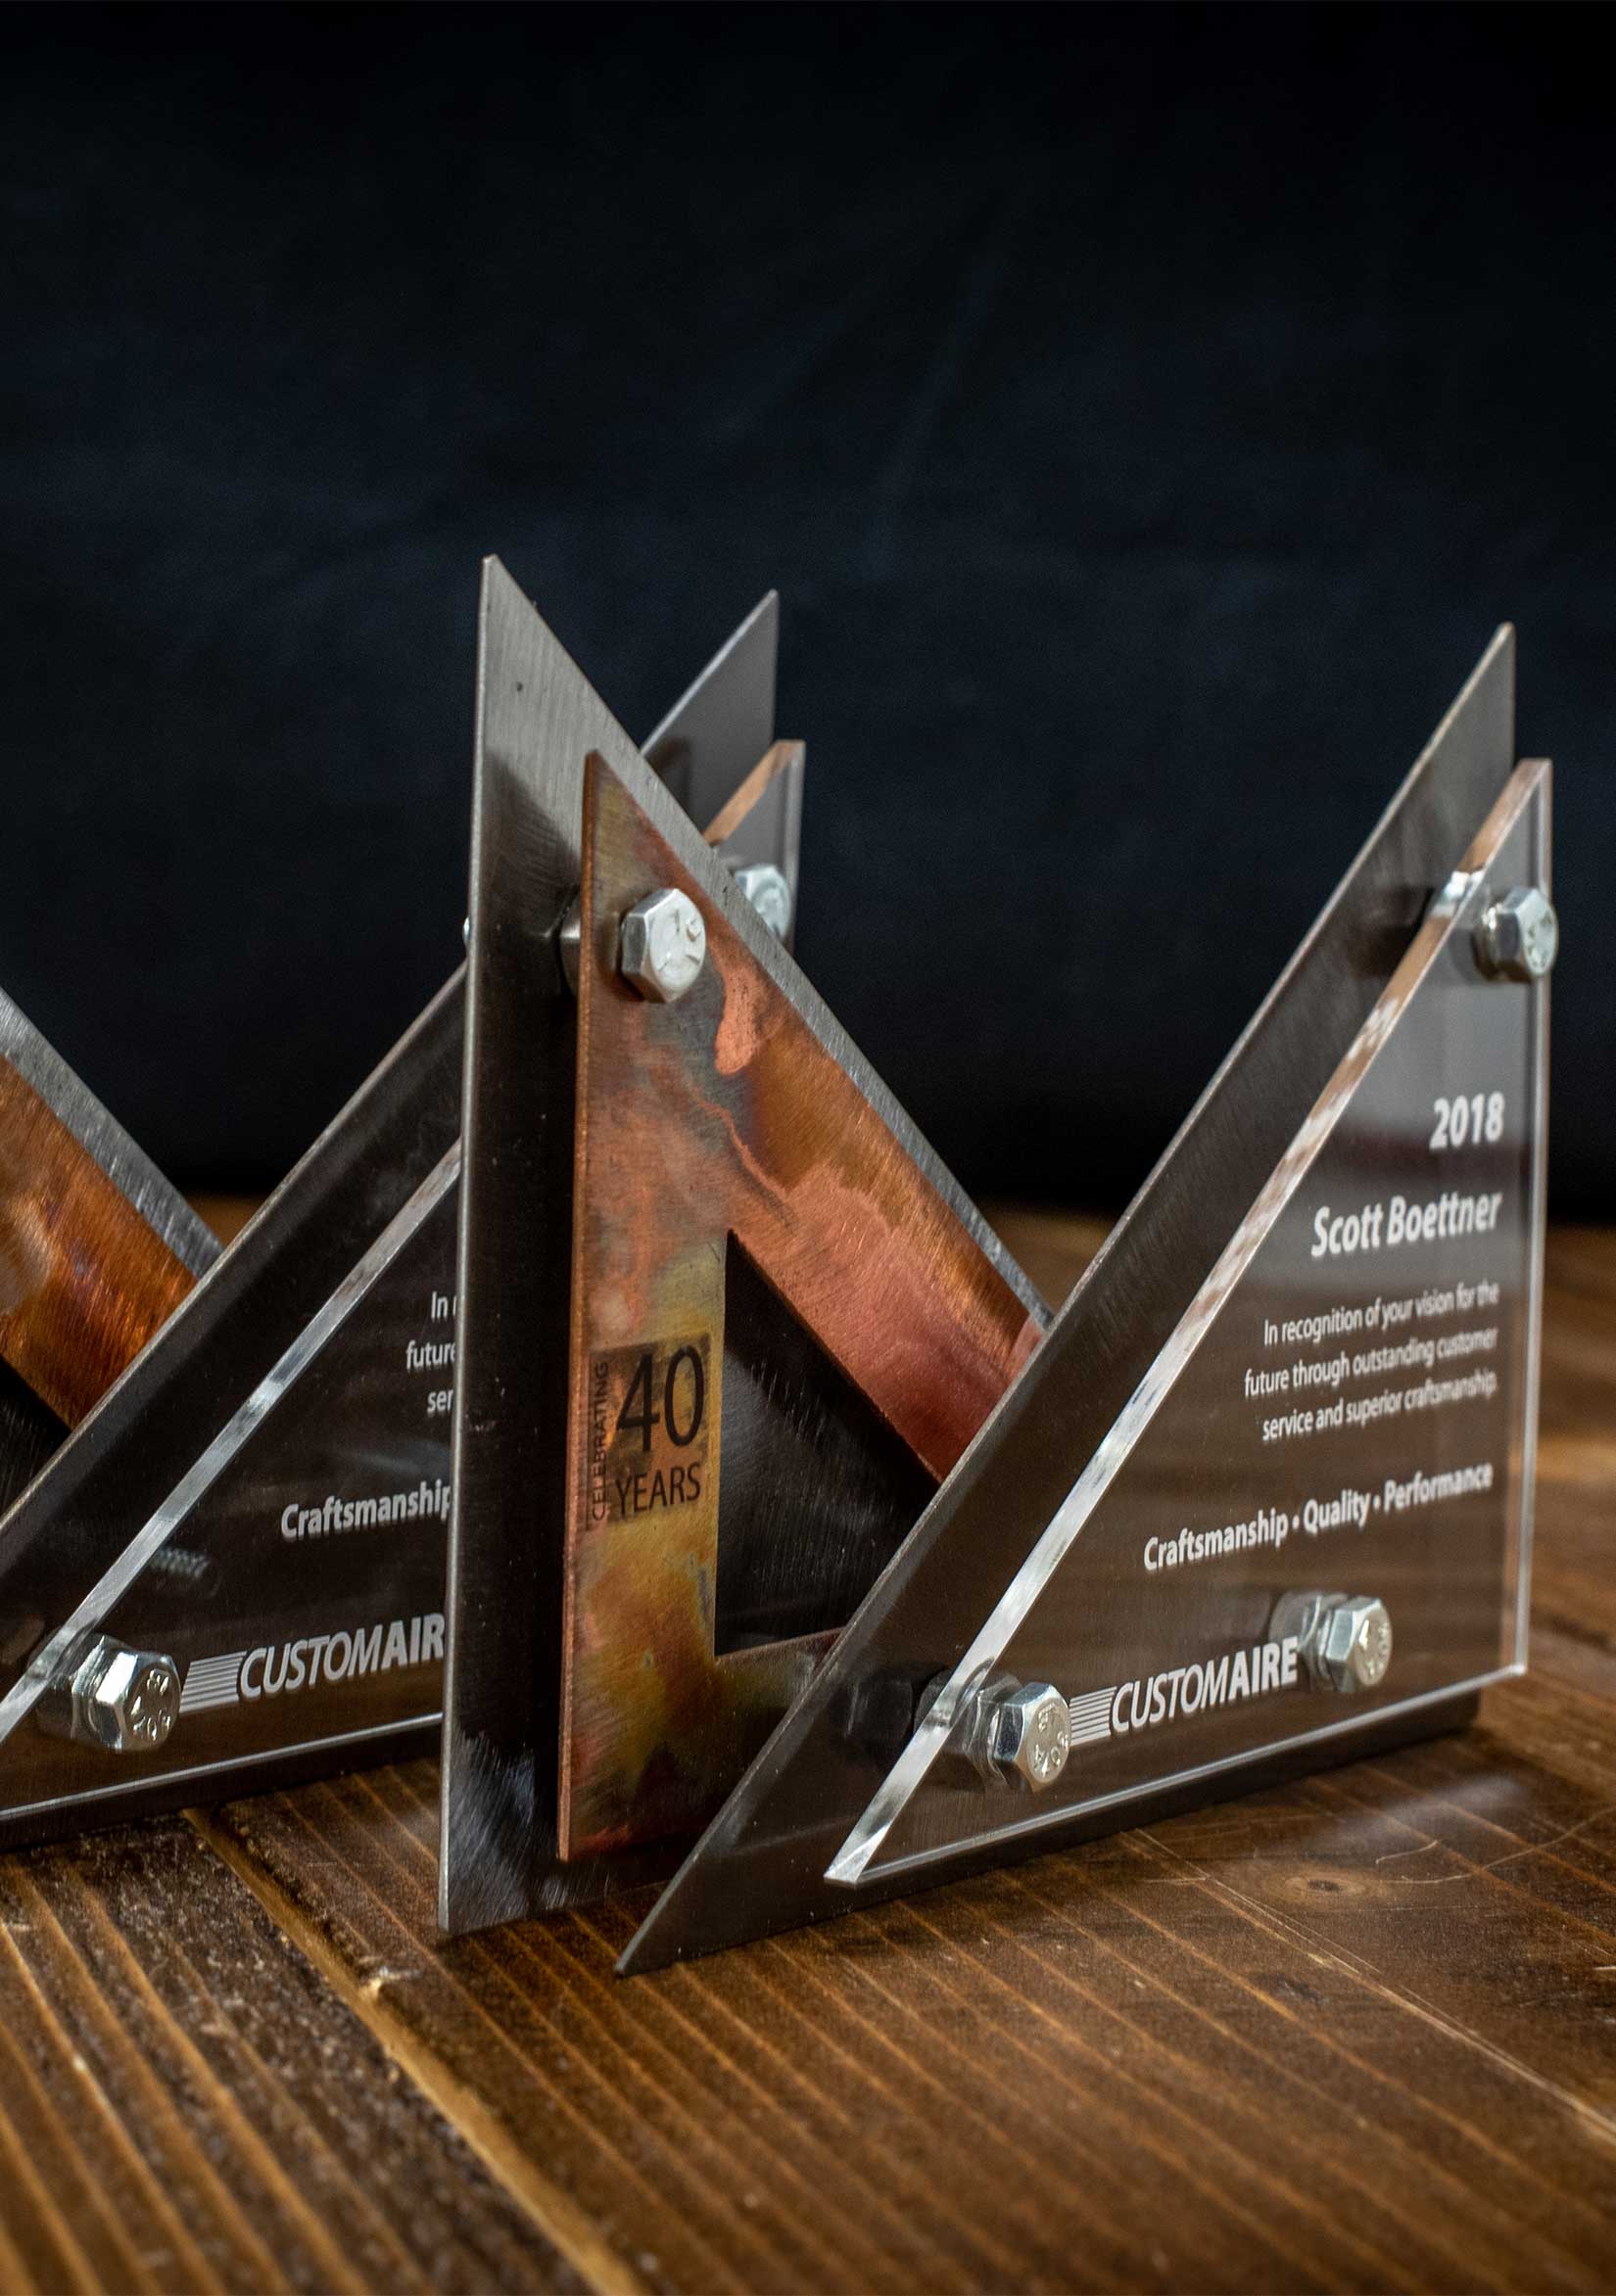 Two metal and triangular awards created for Custom Aire.